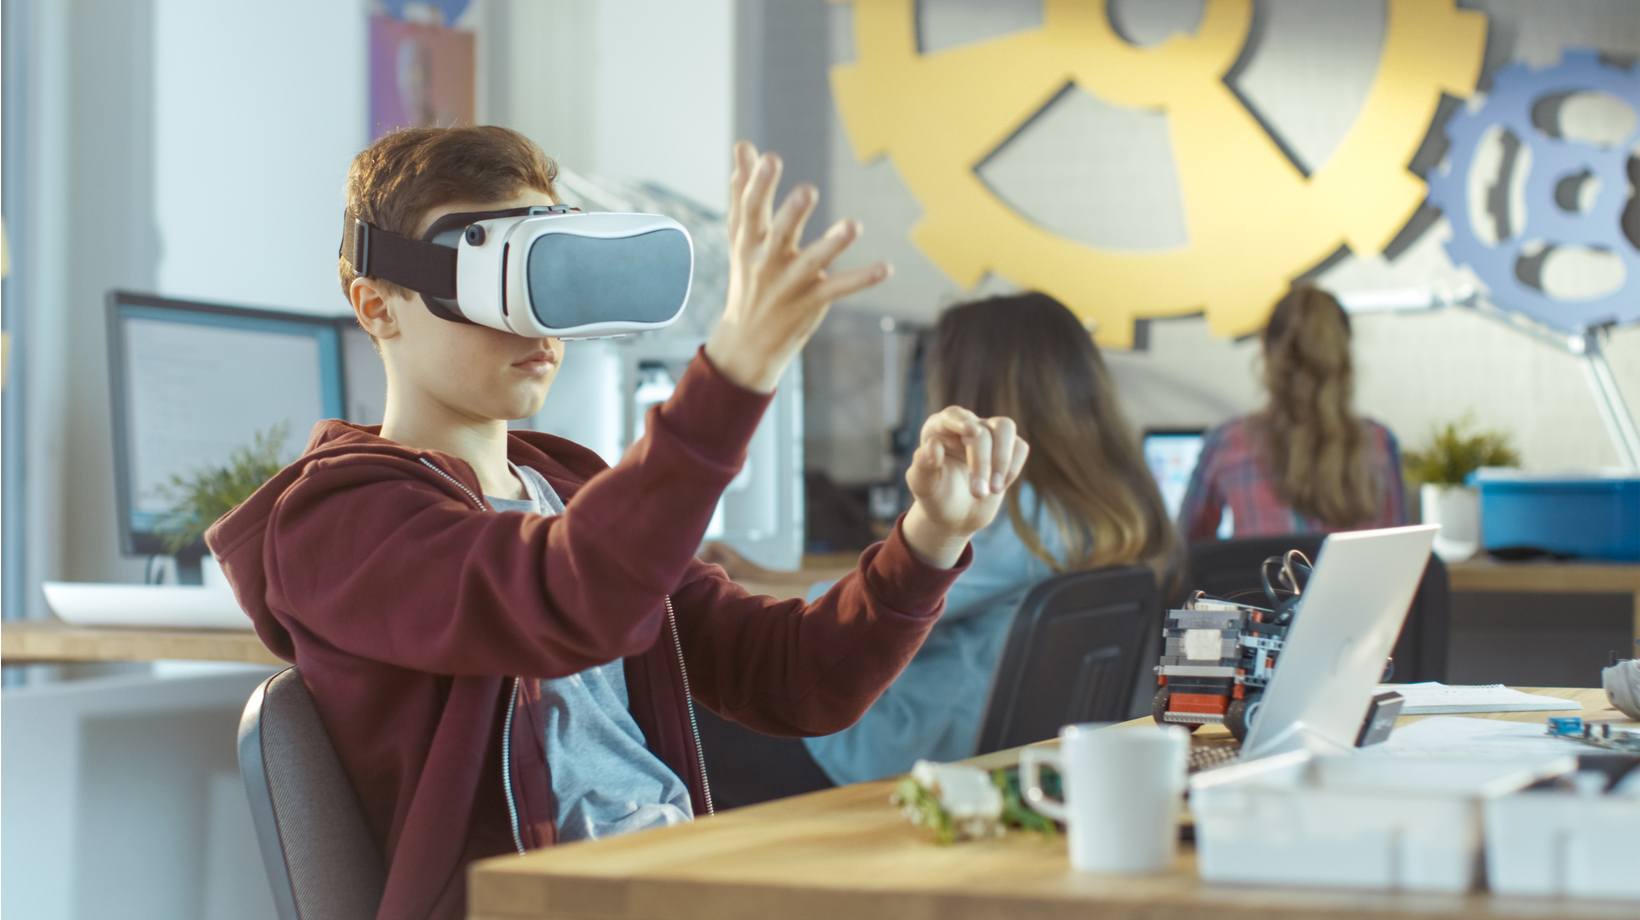 How To Effectively Use Augmented Reality And Virtual Reality In Education  -eLearning Industry